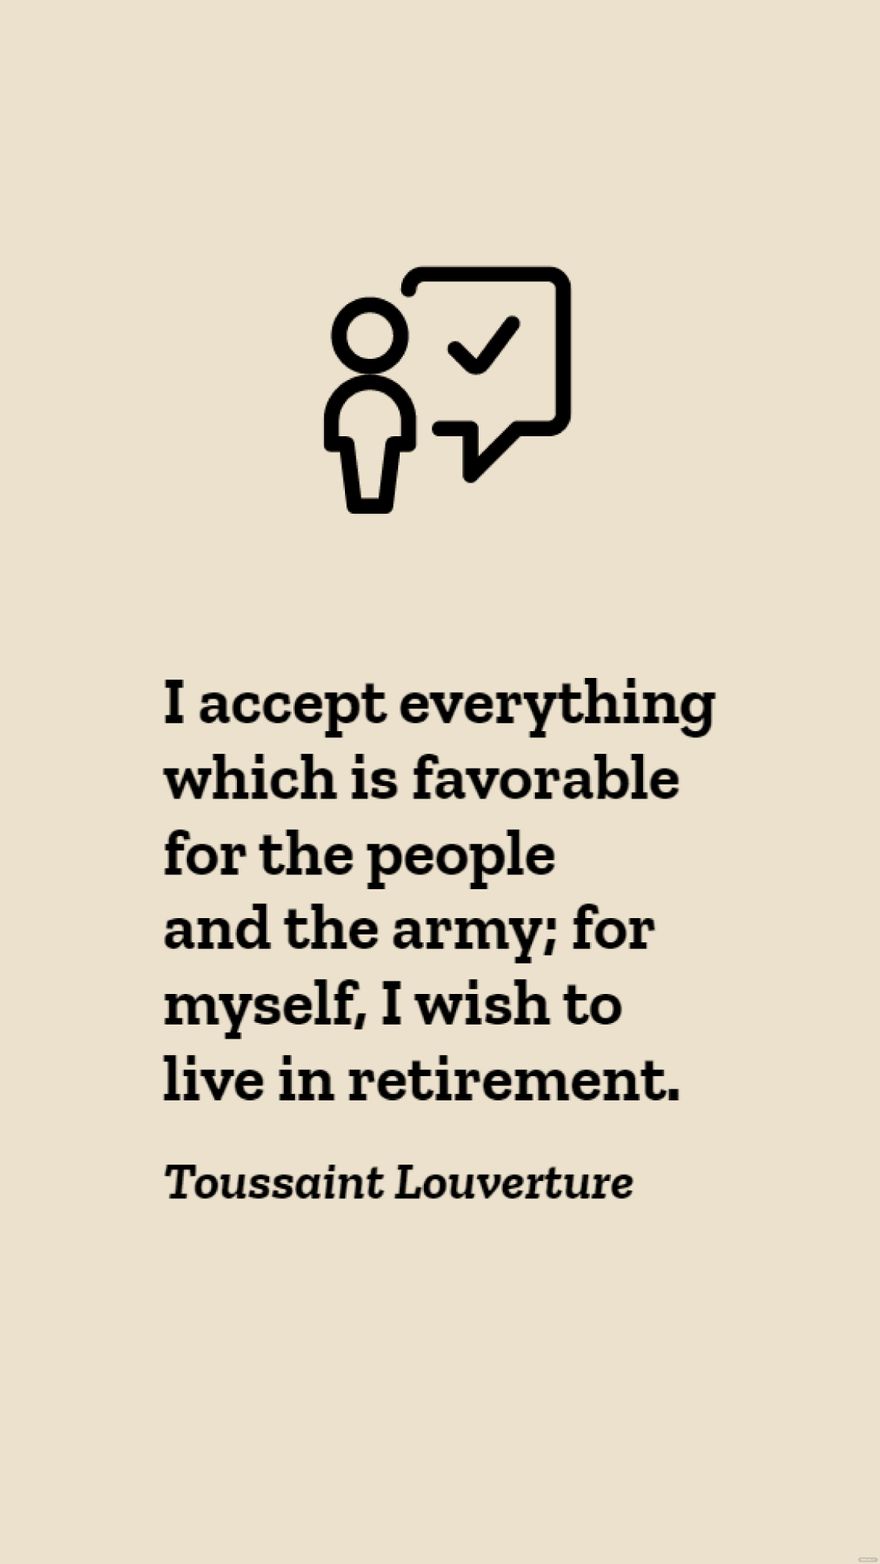 Toussaint Louverture - I accept everything which is favorable for the people and the army; for myself, I wish to live in retirement.